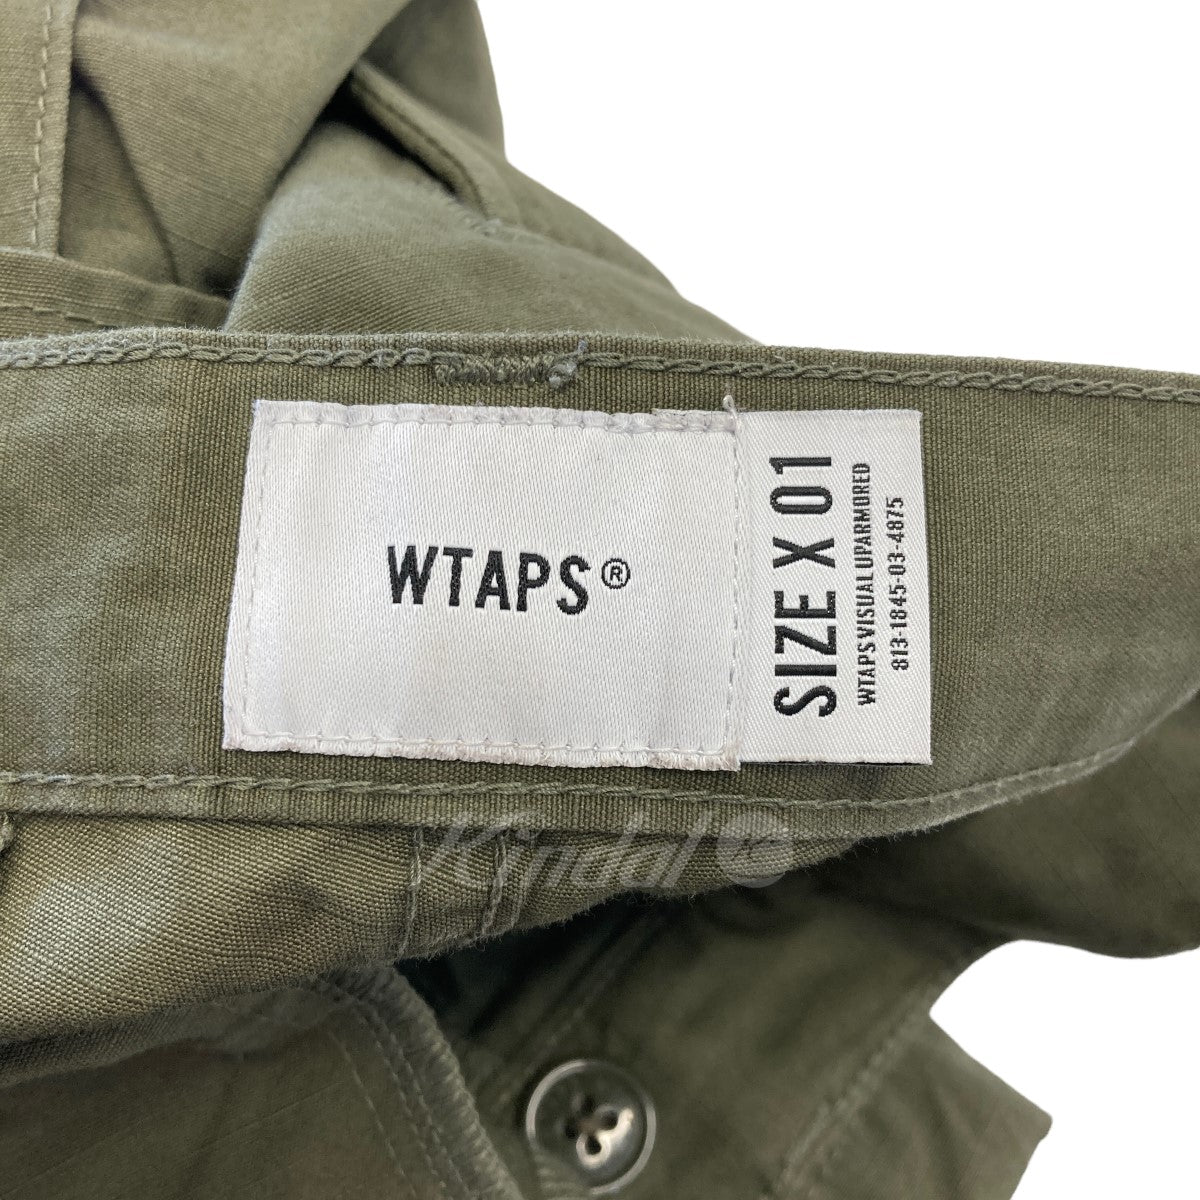 WTAPS(ダブルタップス) 21SS JUNGLE STOCK ／ TROUSERS ／ COTTON ...